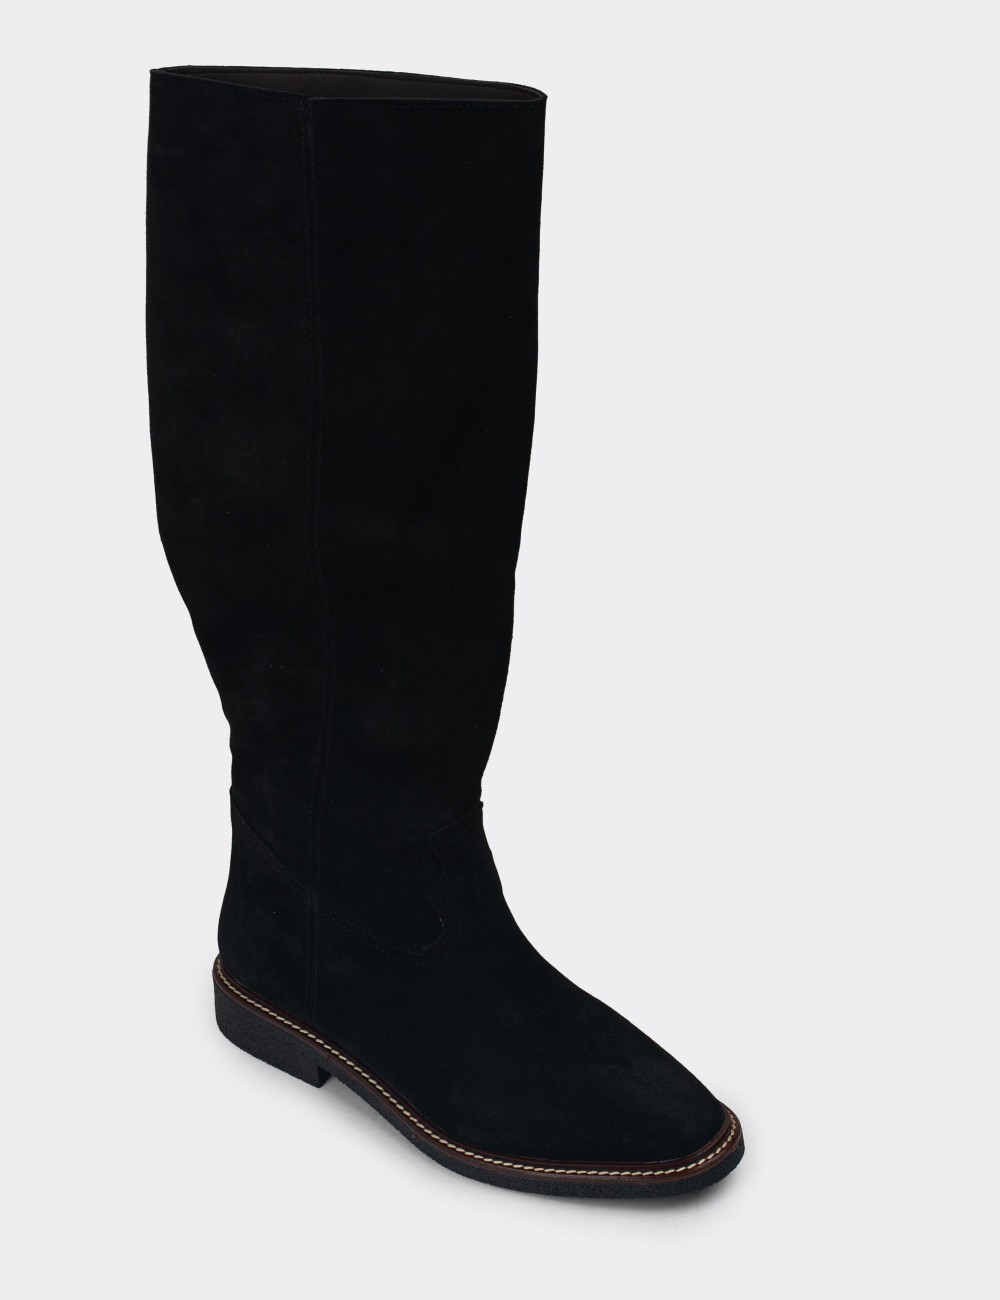 Black Suede Leather Boots - 01968ZSYHC01